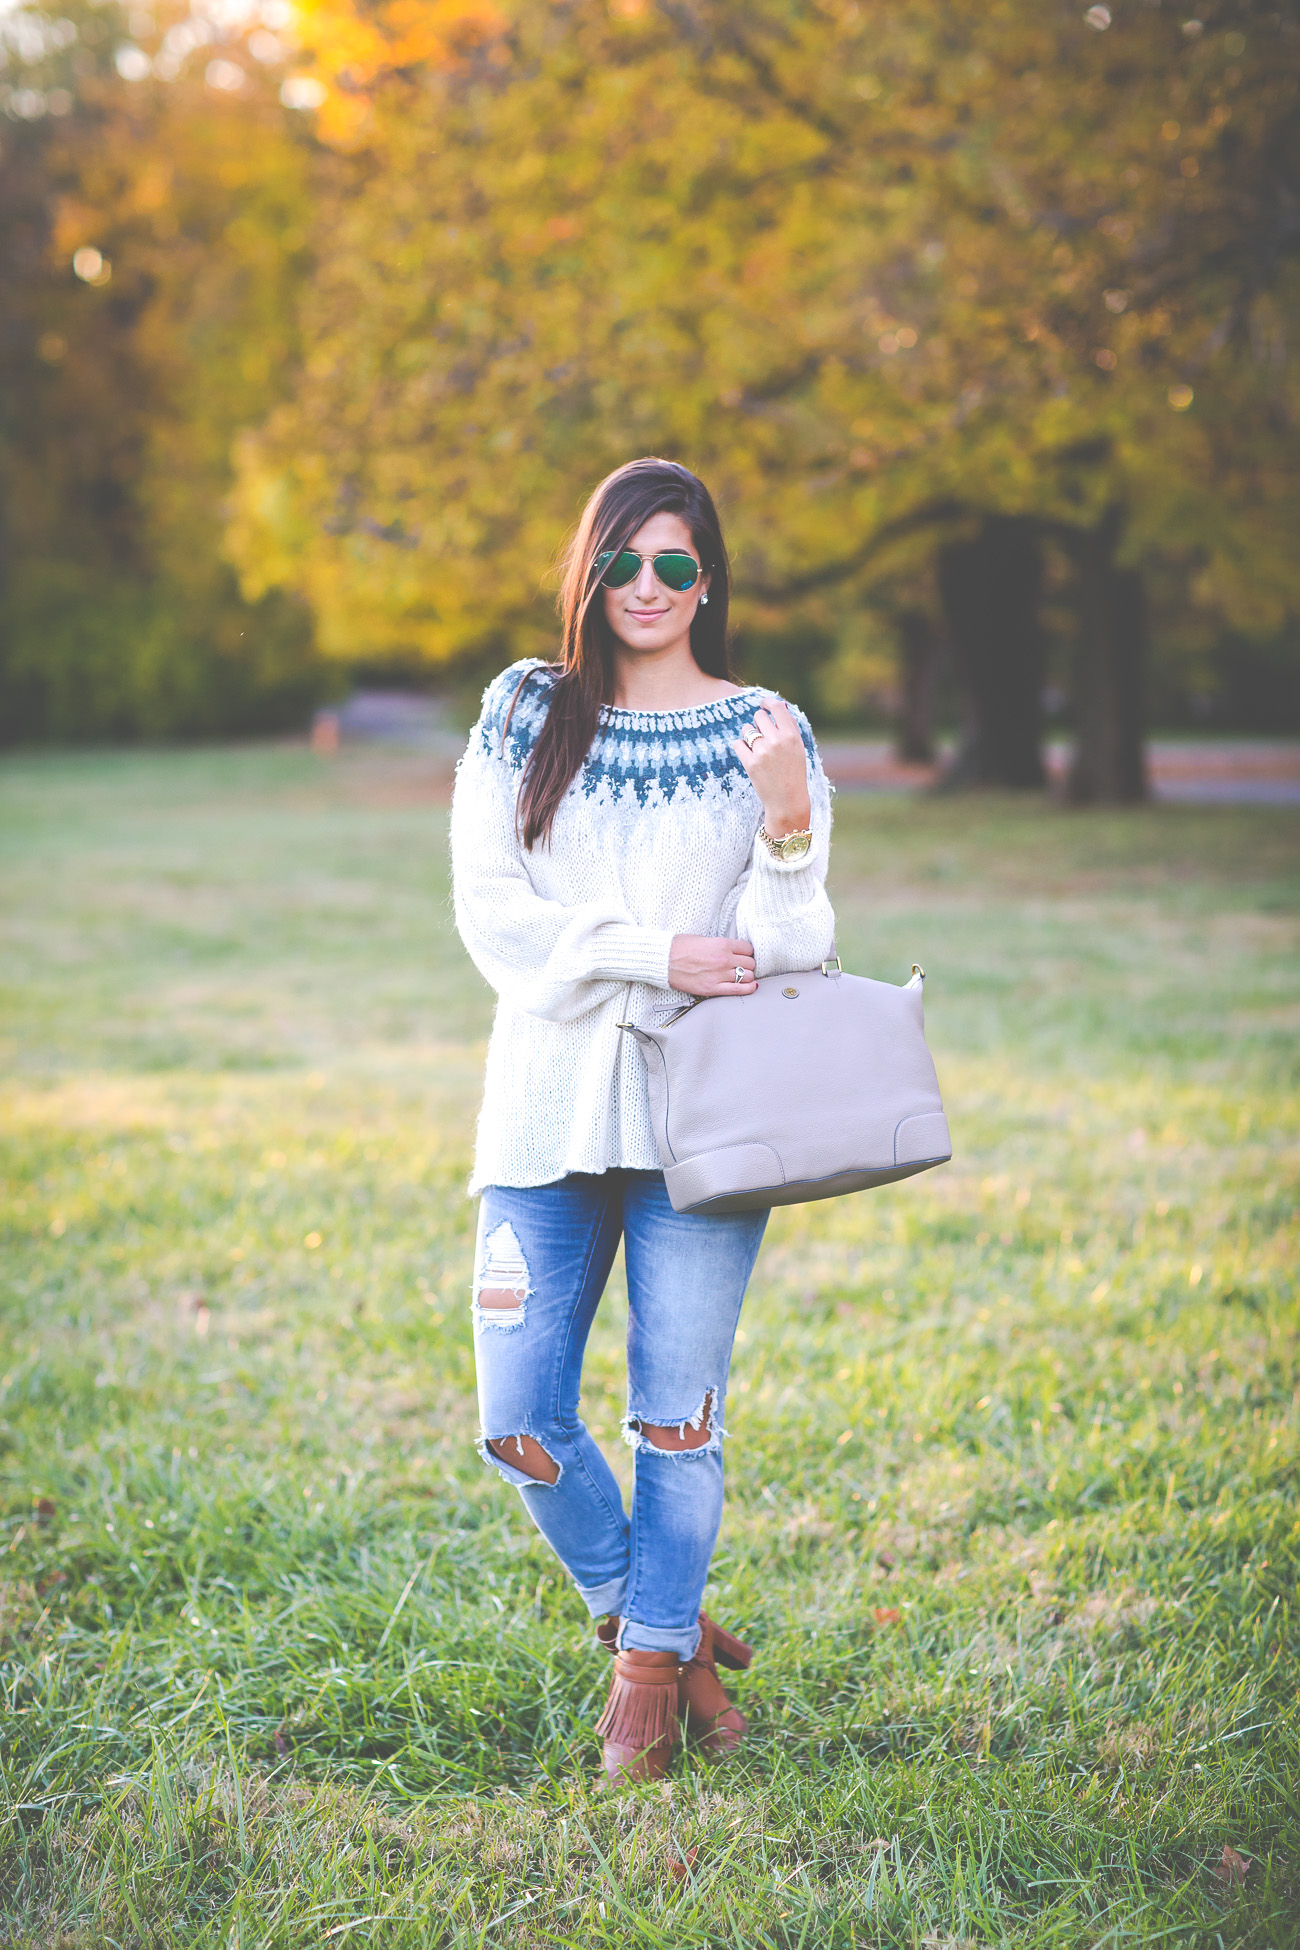 fair isle sweater, free people sweater, fall style, fall fashion, fall outfit ideas, distressed jeans, fringe booties, fringe boots, preppy fall style // grace wainwright from a southern drawl